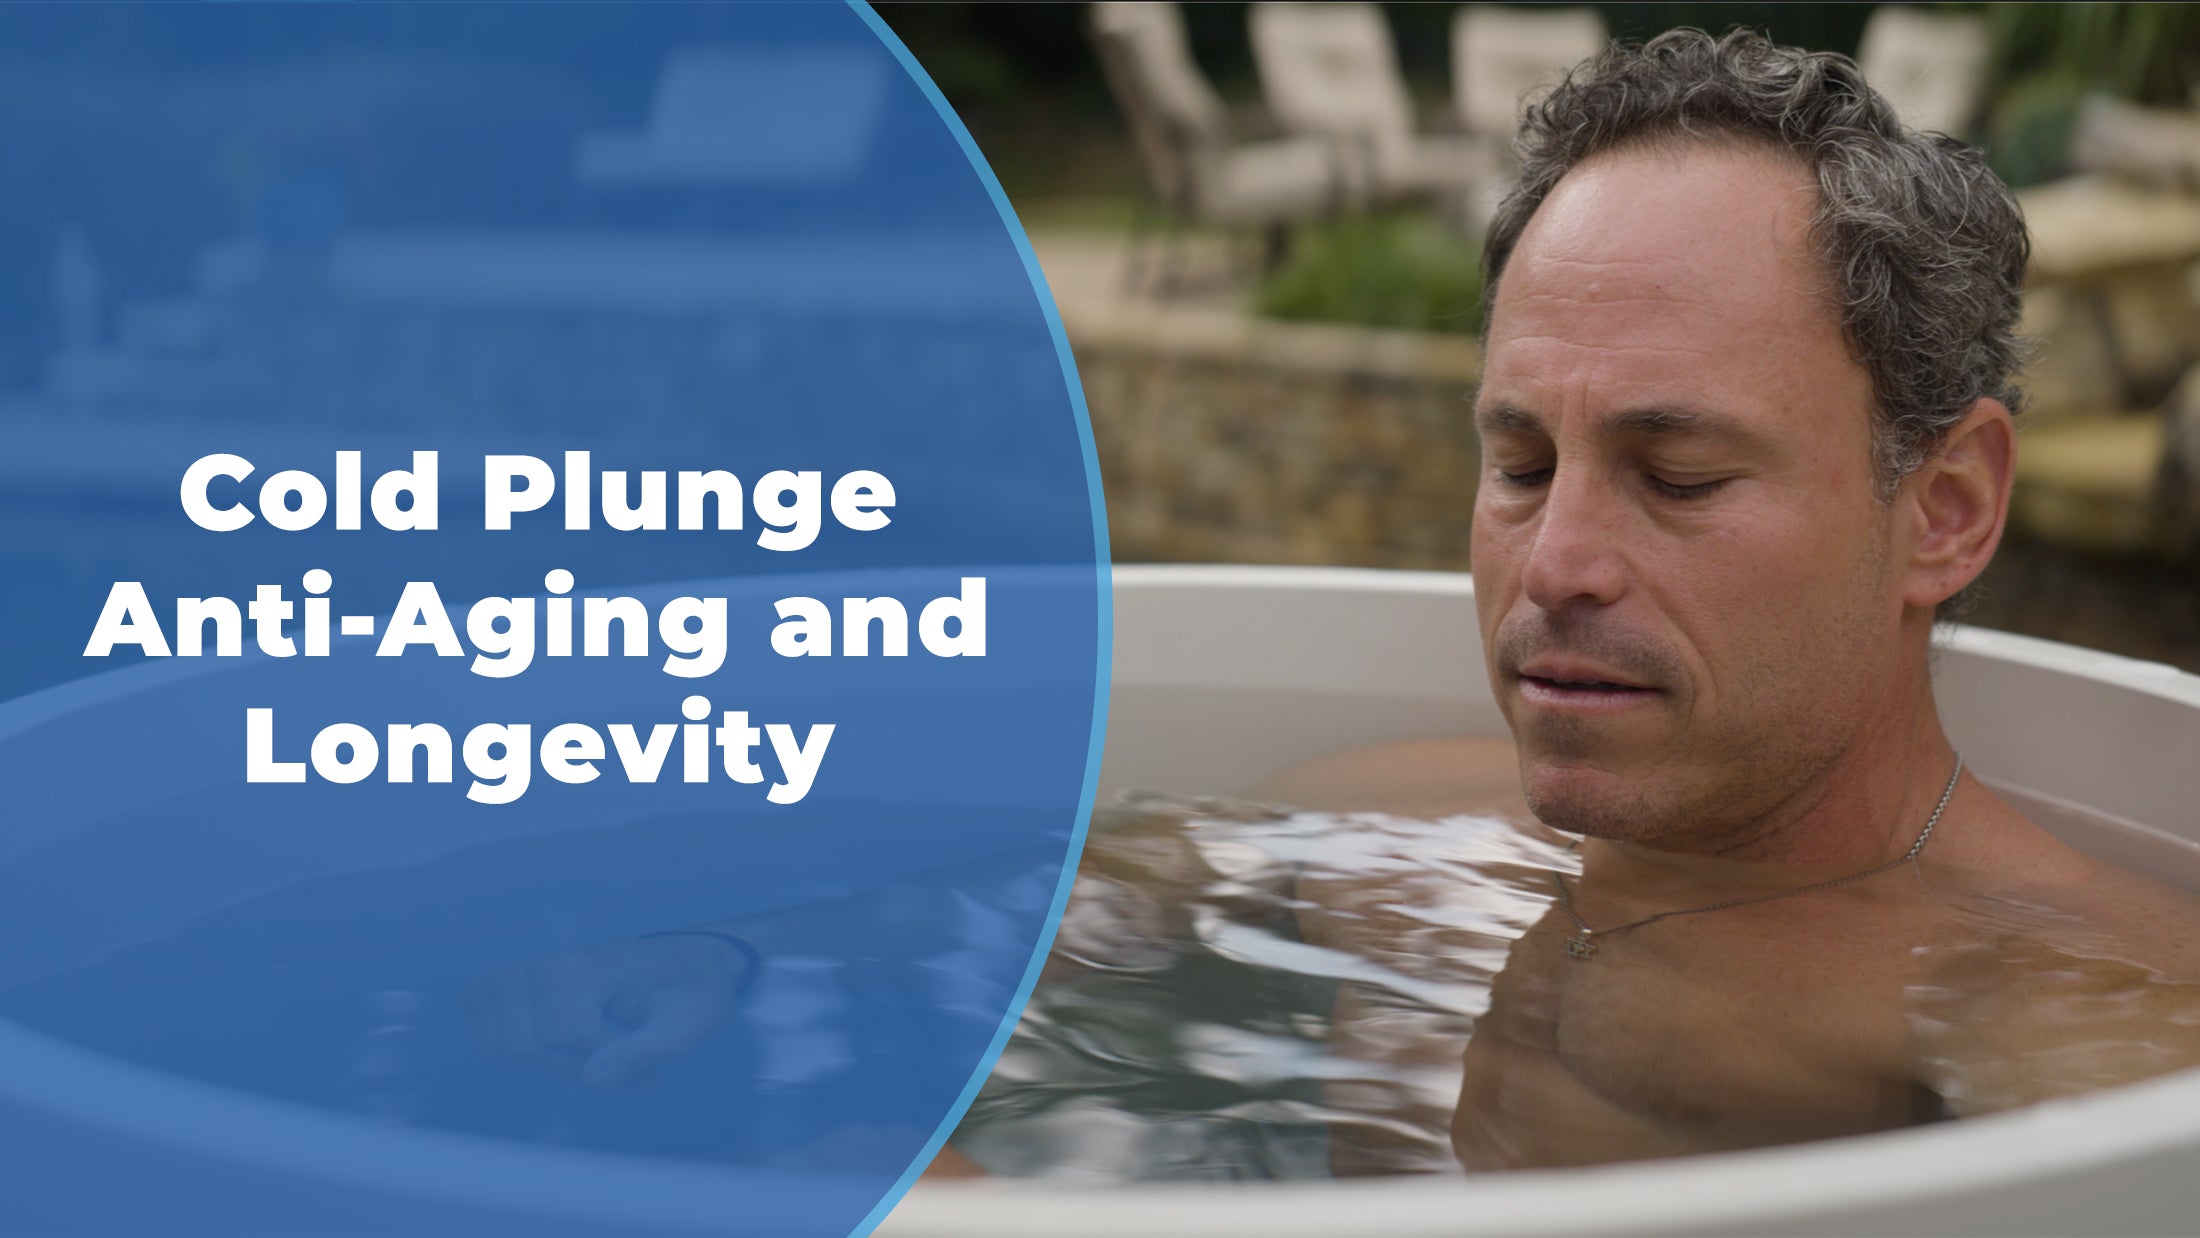 Cold plunge: Meaning and Benefits